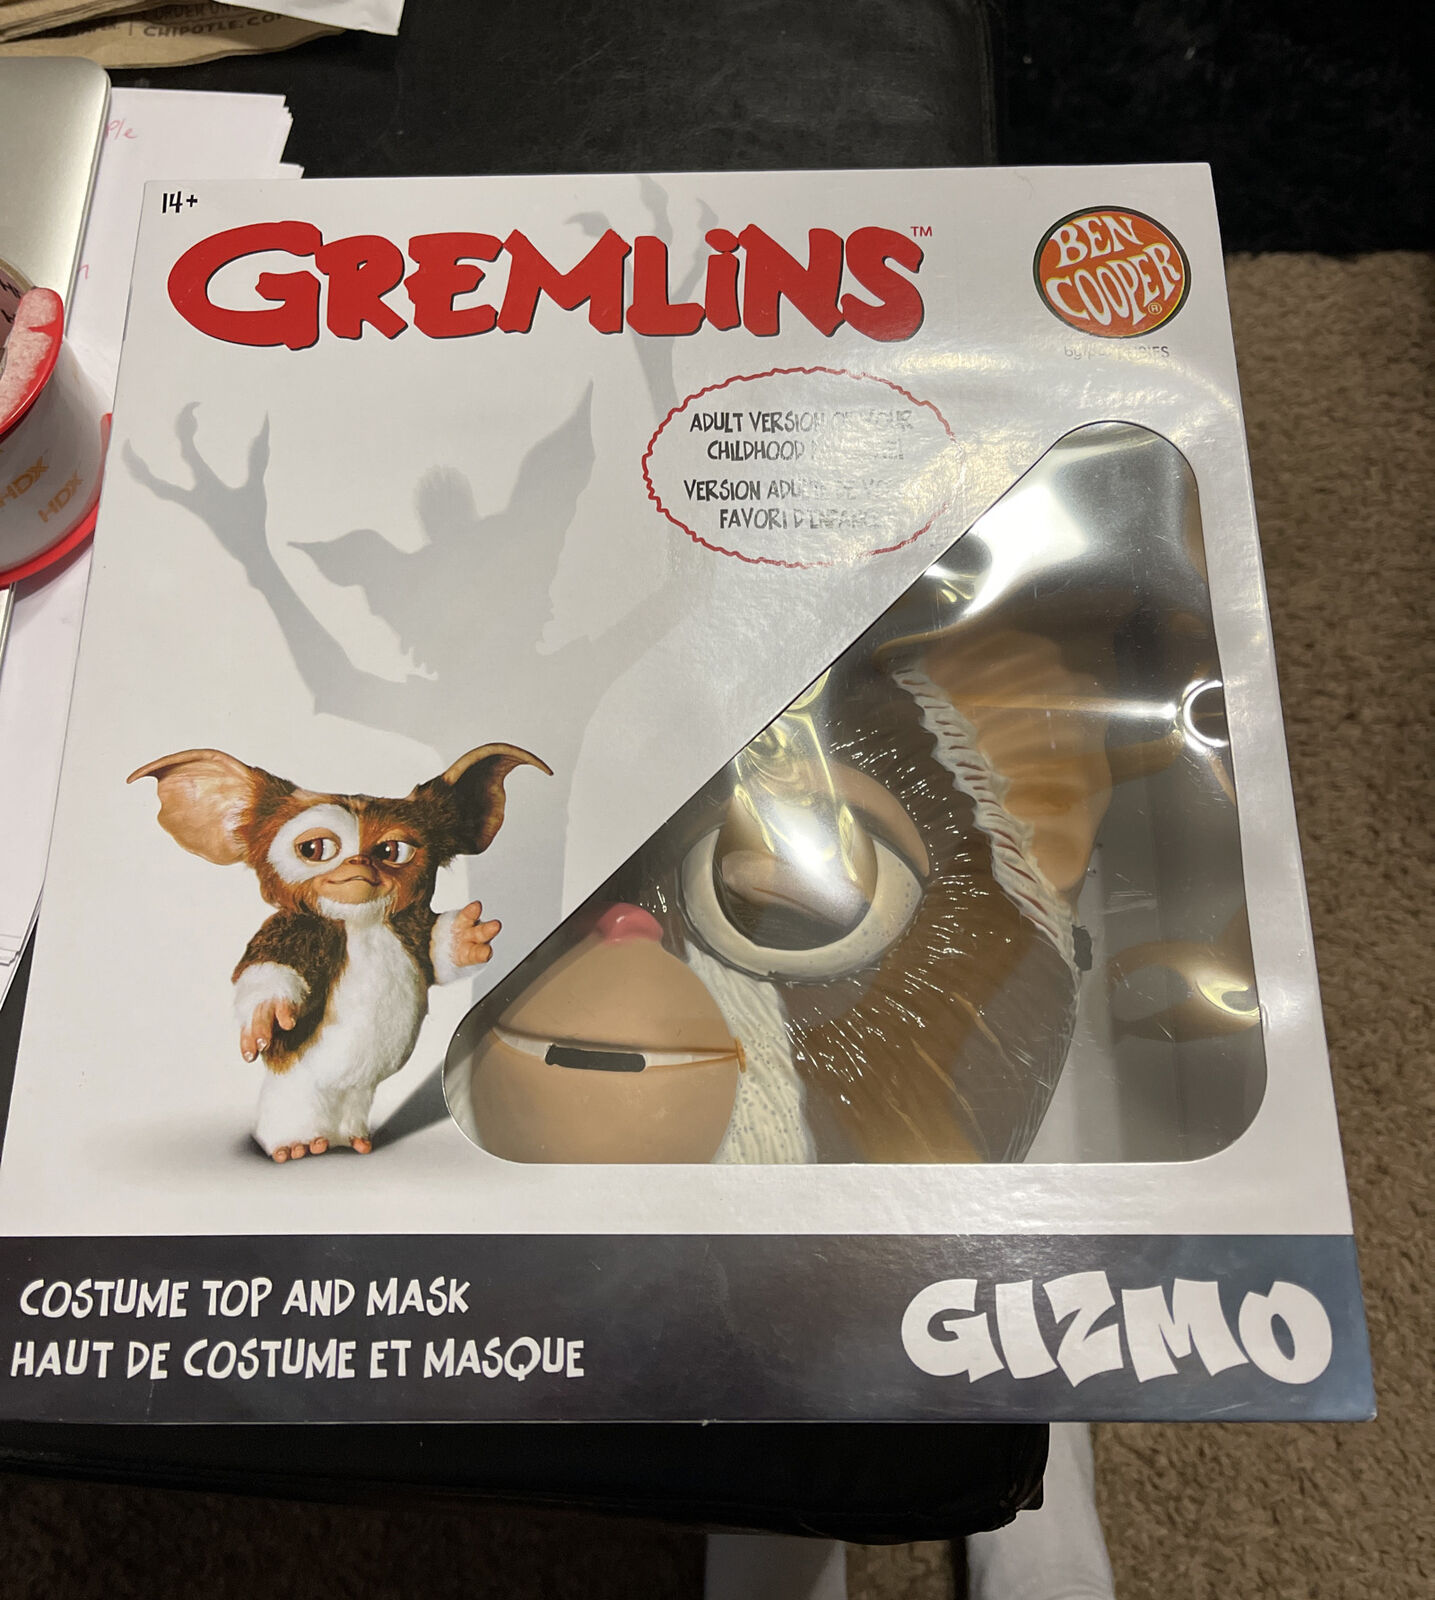 Ben Cooper Gremlins GIZMO Halloween Costume And Mask Adult One Size Rubies